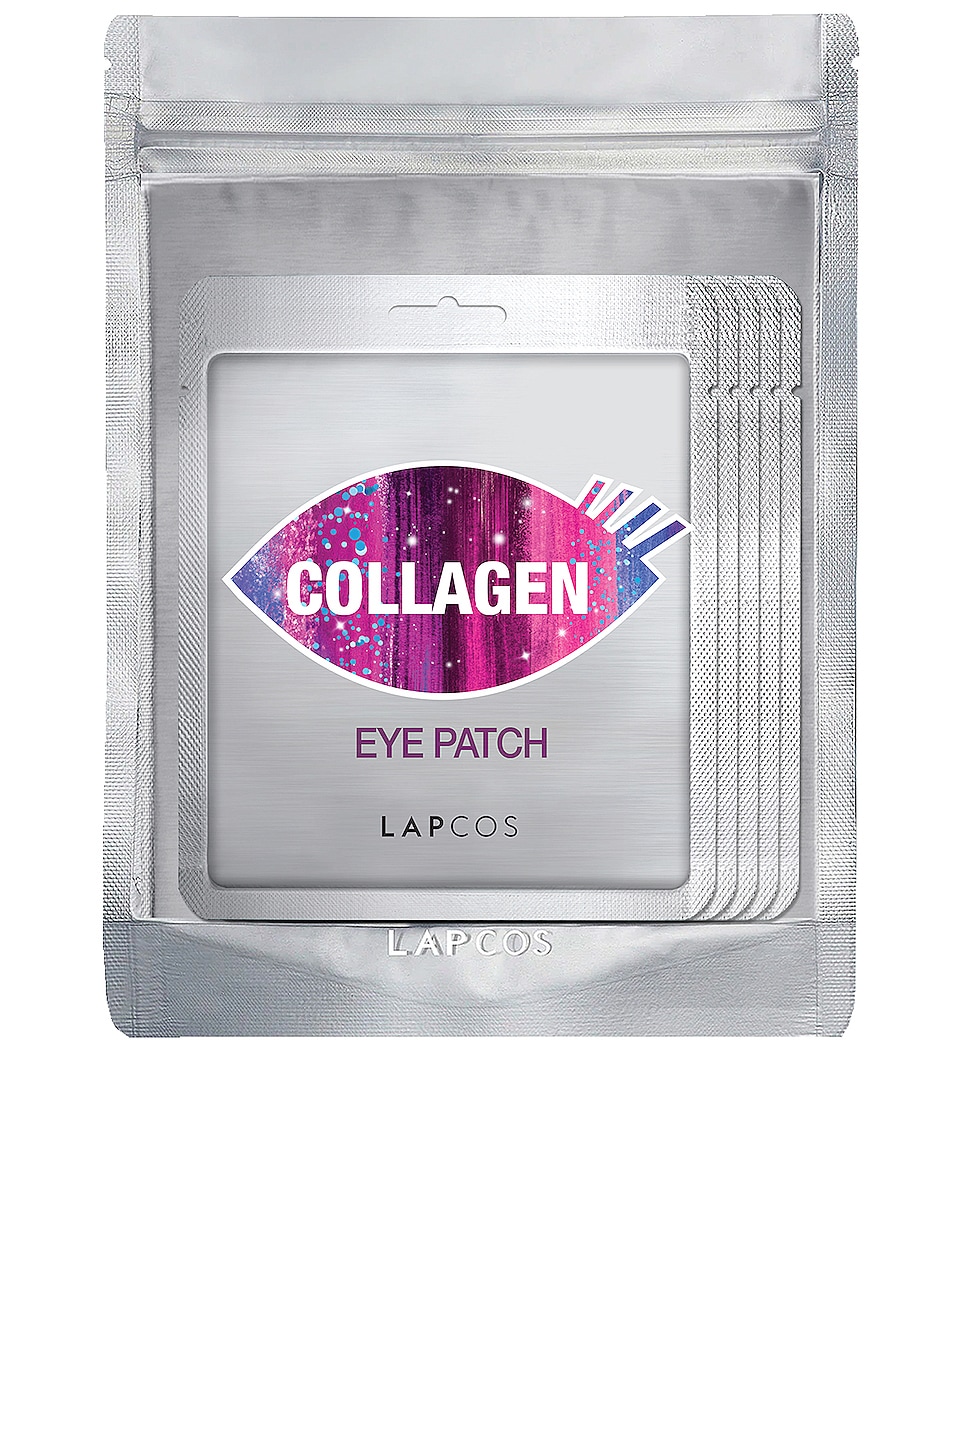 Lapcos Collagen Firming Eye Patch 5 Pack In N,a